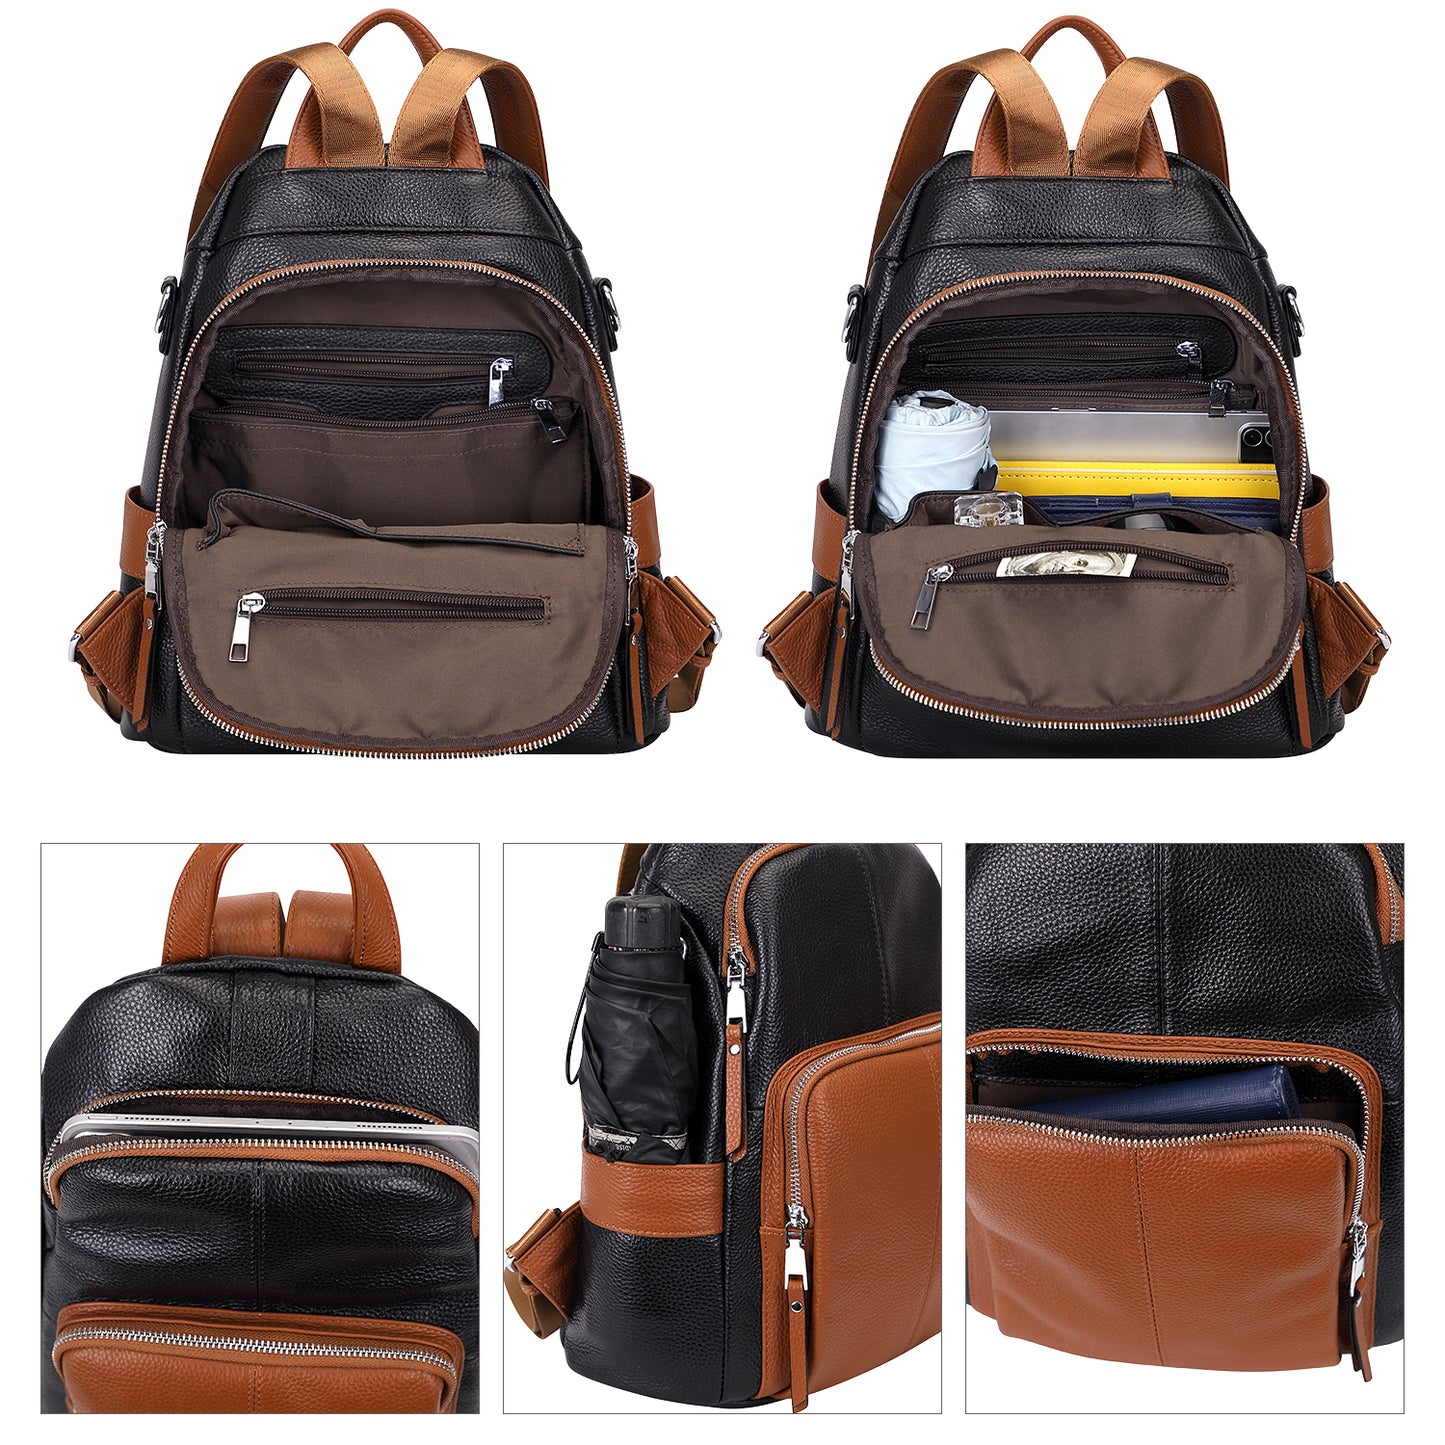 ALTOSY Leather Anti-theft Backpack